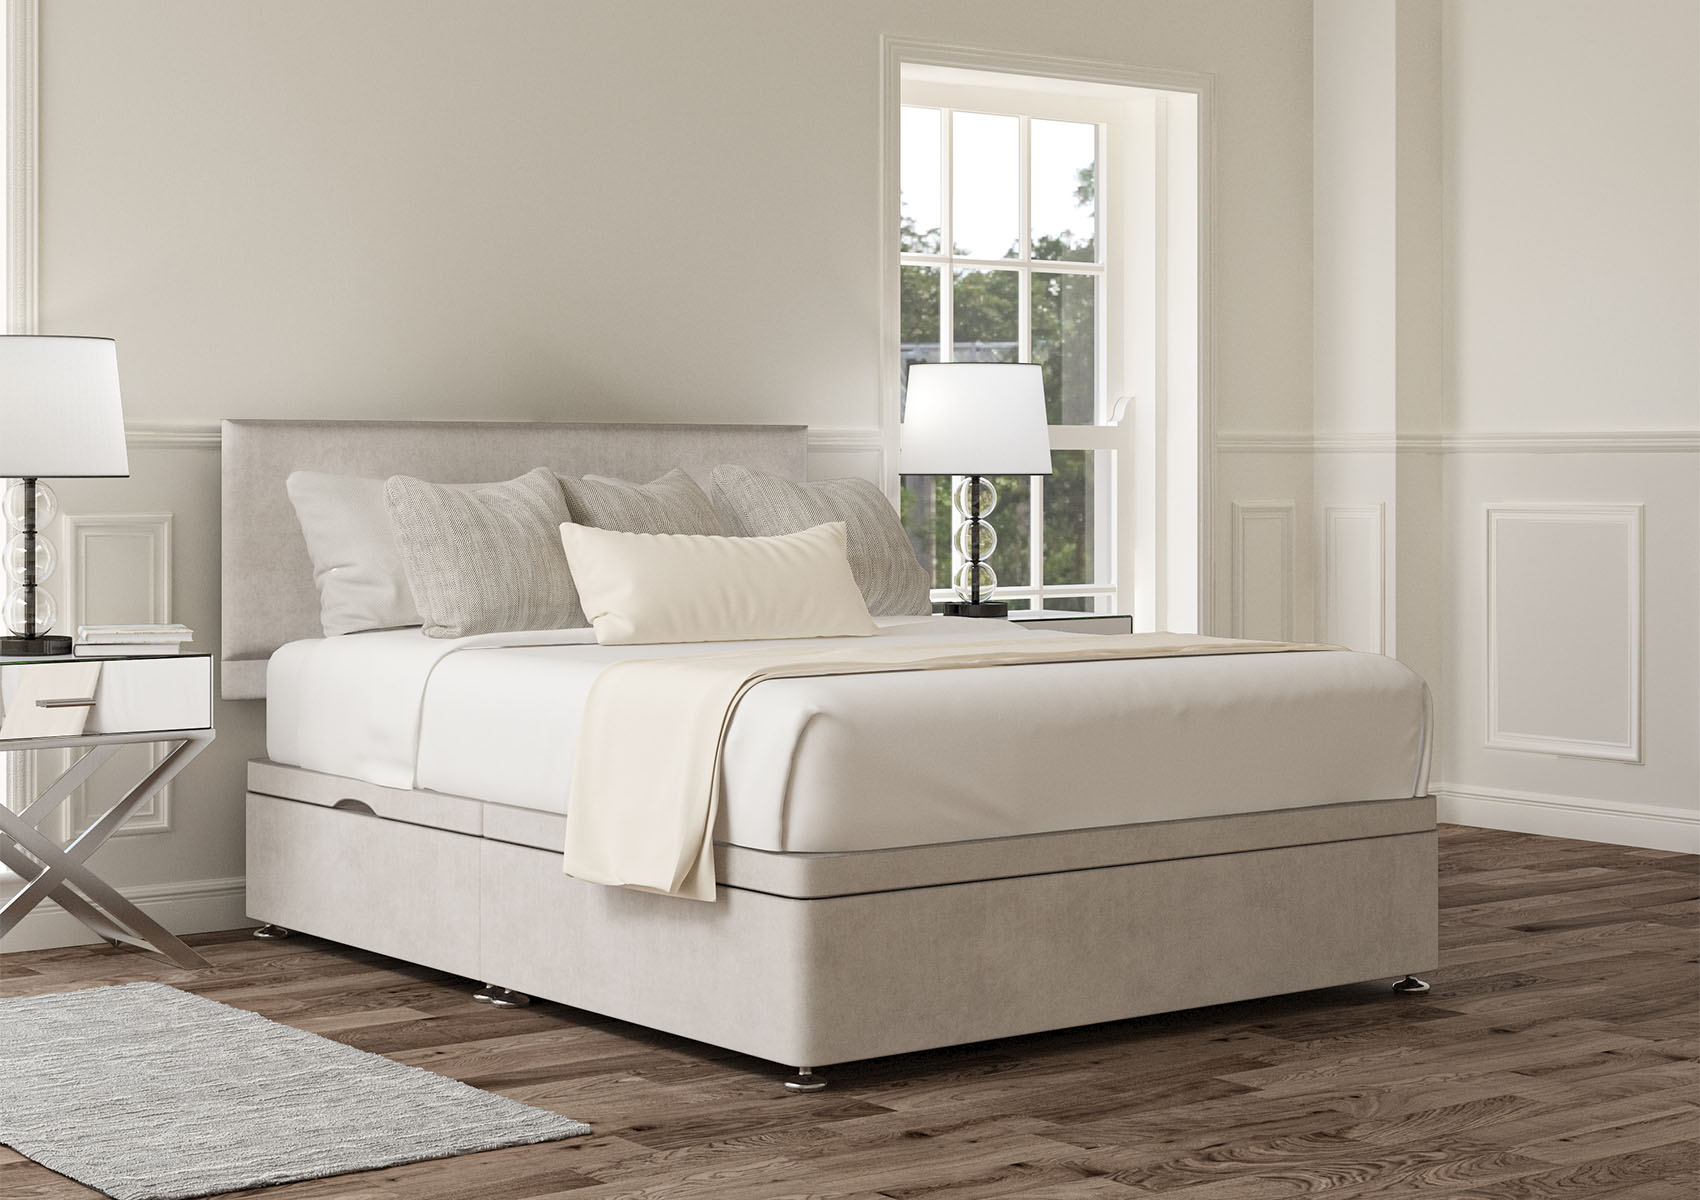 View Henley Plush Silver Upholstered King Size Ottoman Bed Time4Sleep information